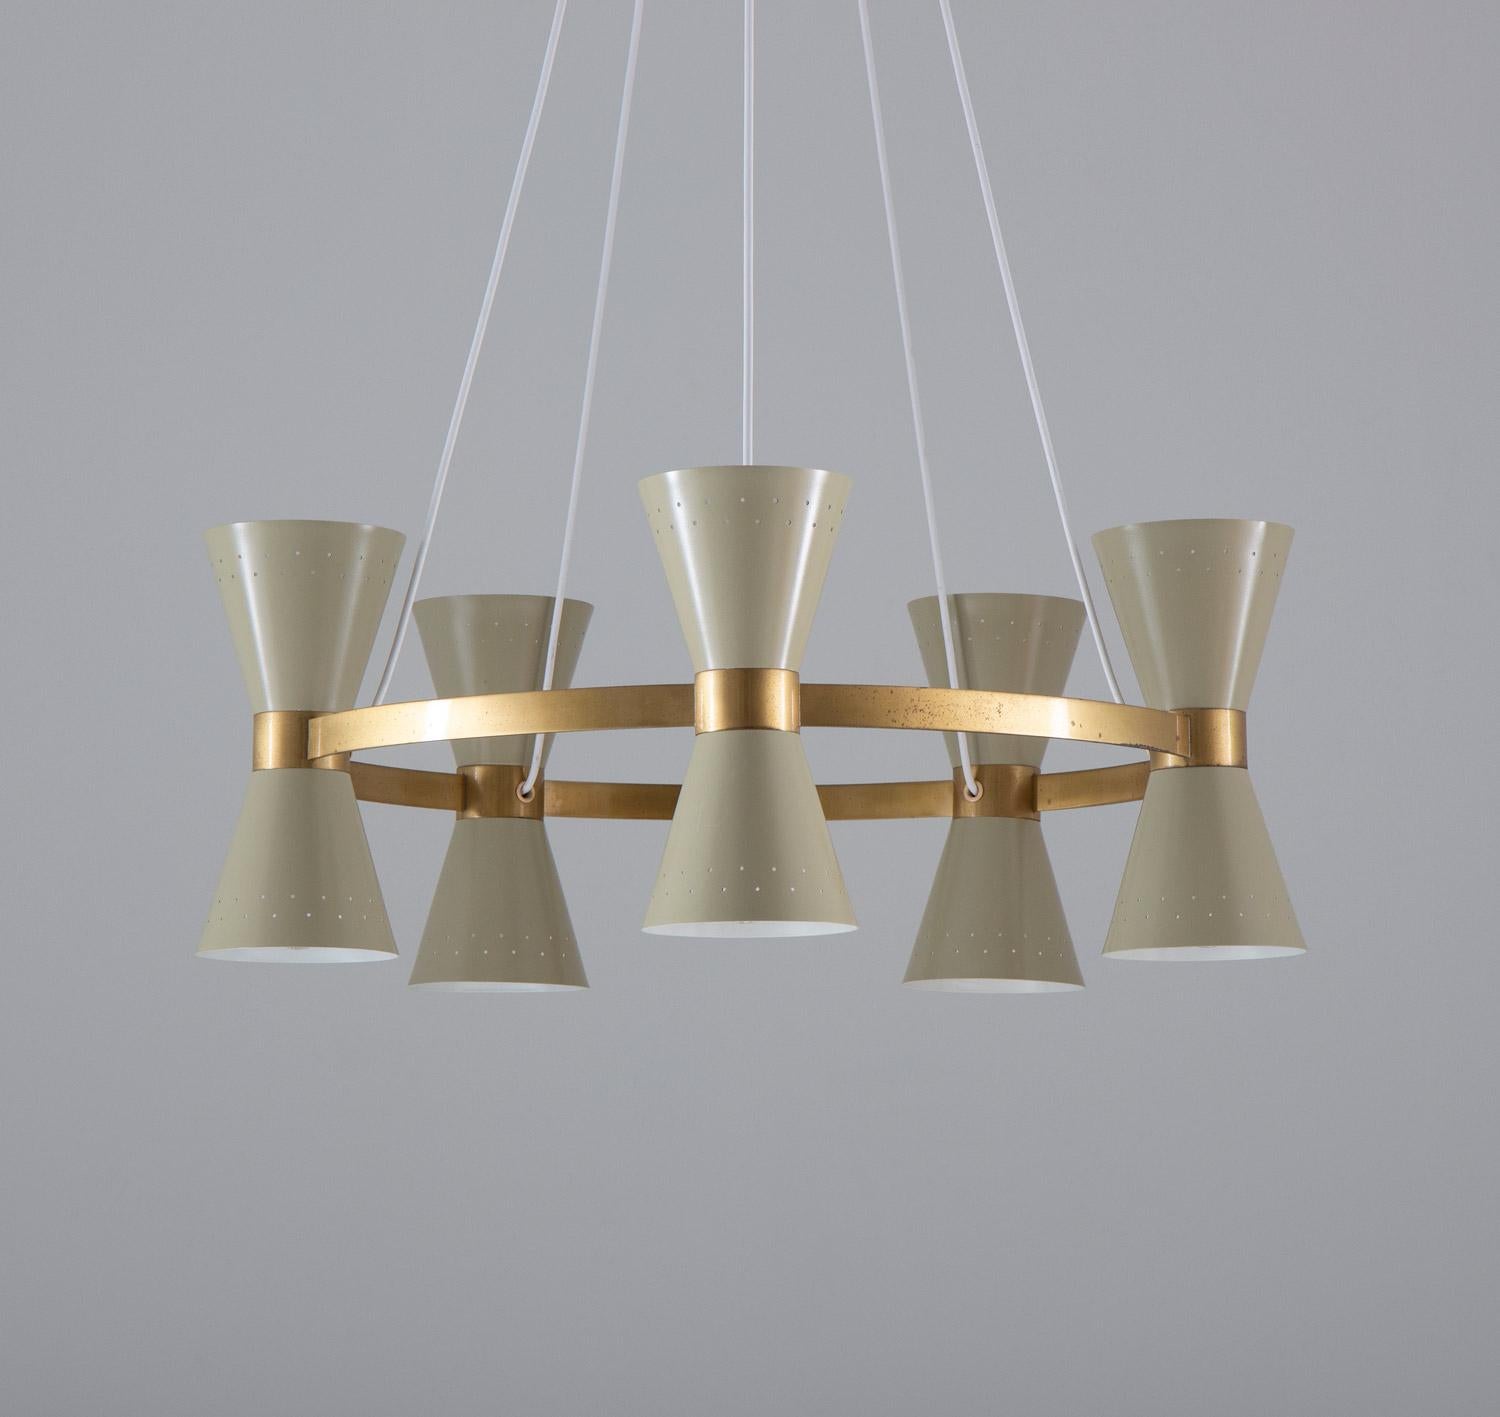 Rare chandeliers by Alf Svensson for Bergboms, Sweden, 1950s.
This beautiful chandelier consists of a solid brass ring, supporting 10 cone-shaped perforated metal shades, each of them hiding a light source.

Condition: Very good restored